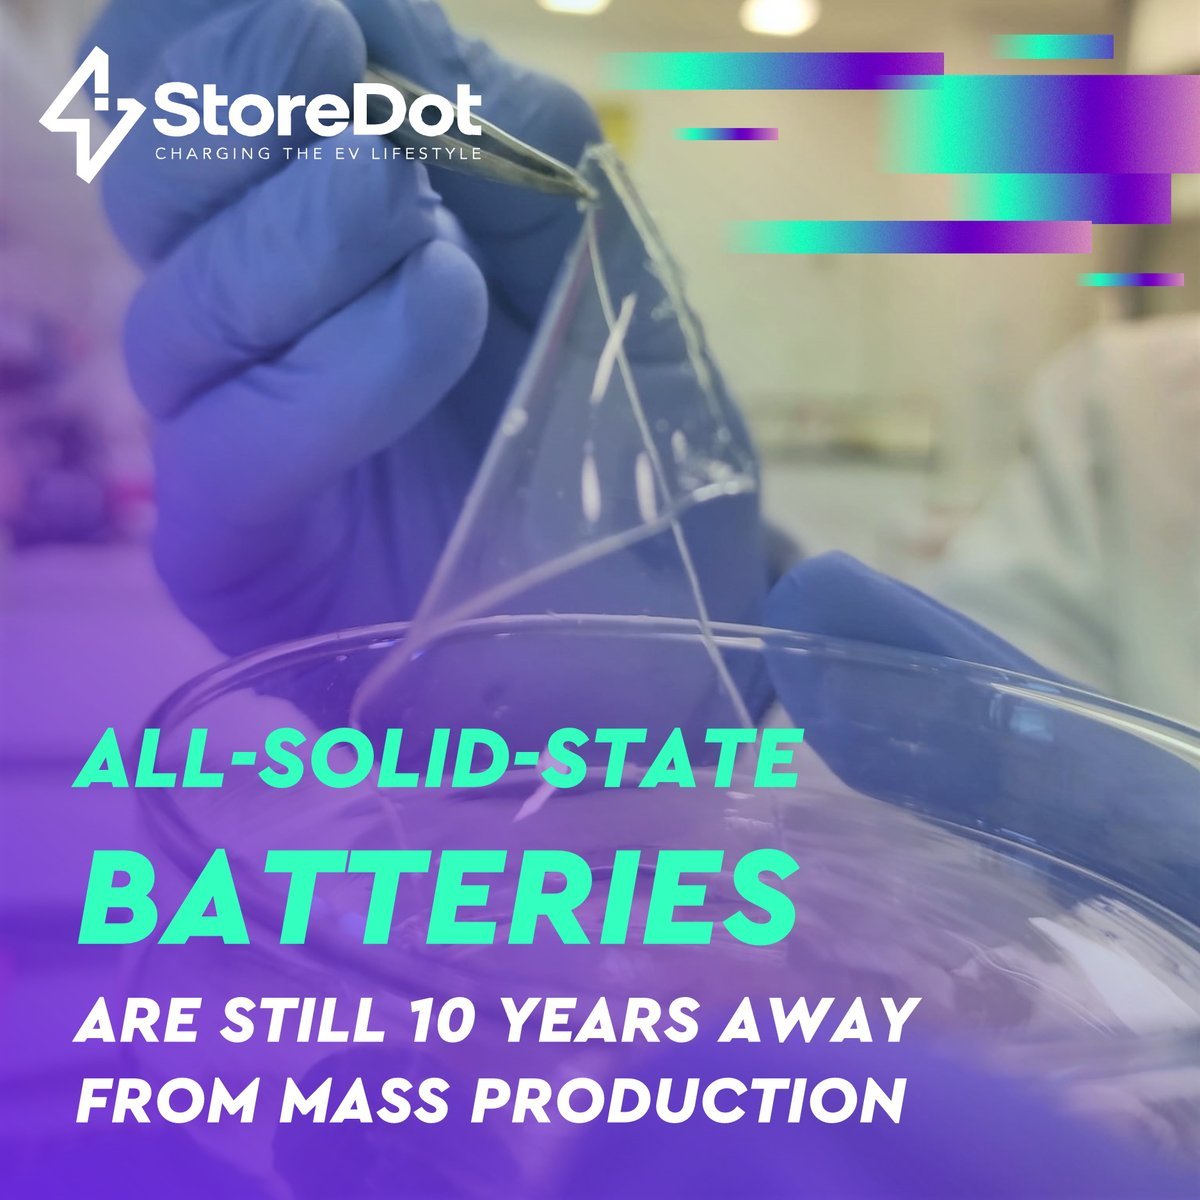 StoreDot's Realistic Claim - Solid-State Batteries Are 10 Years Away